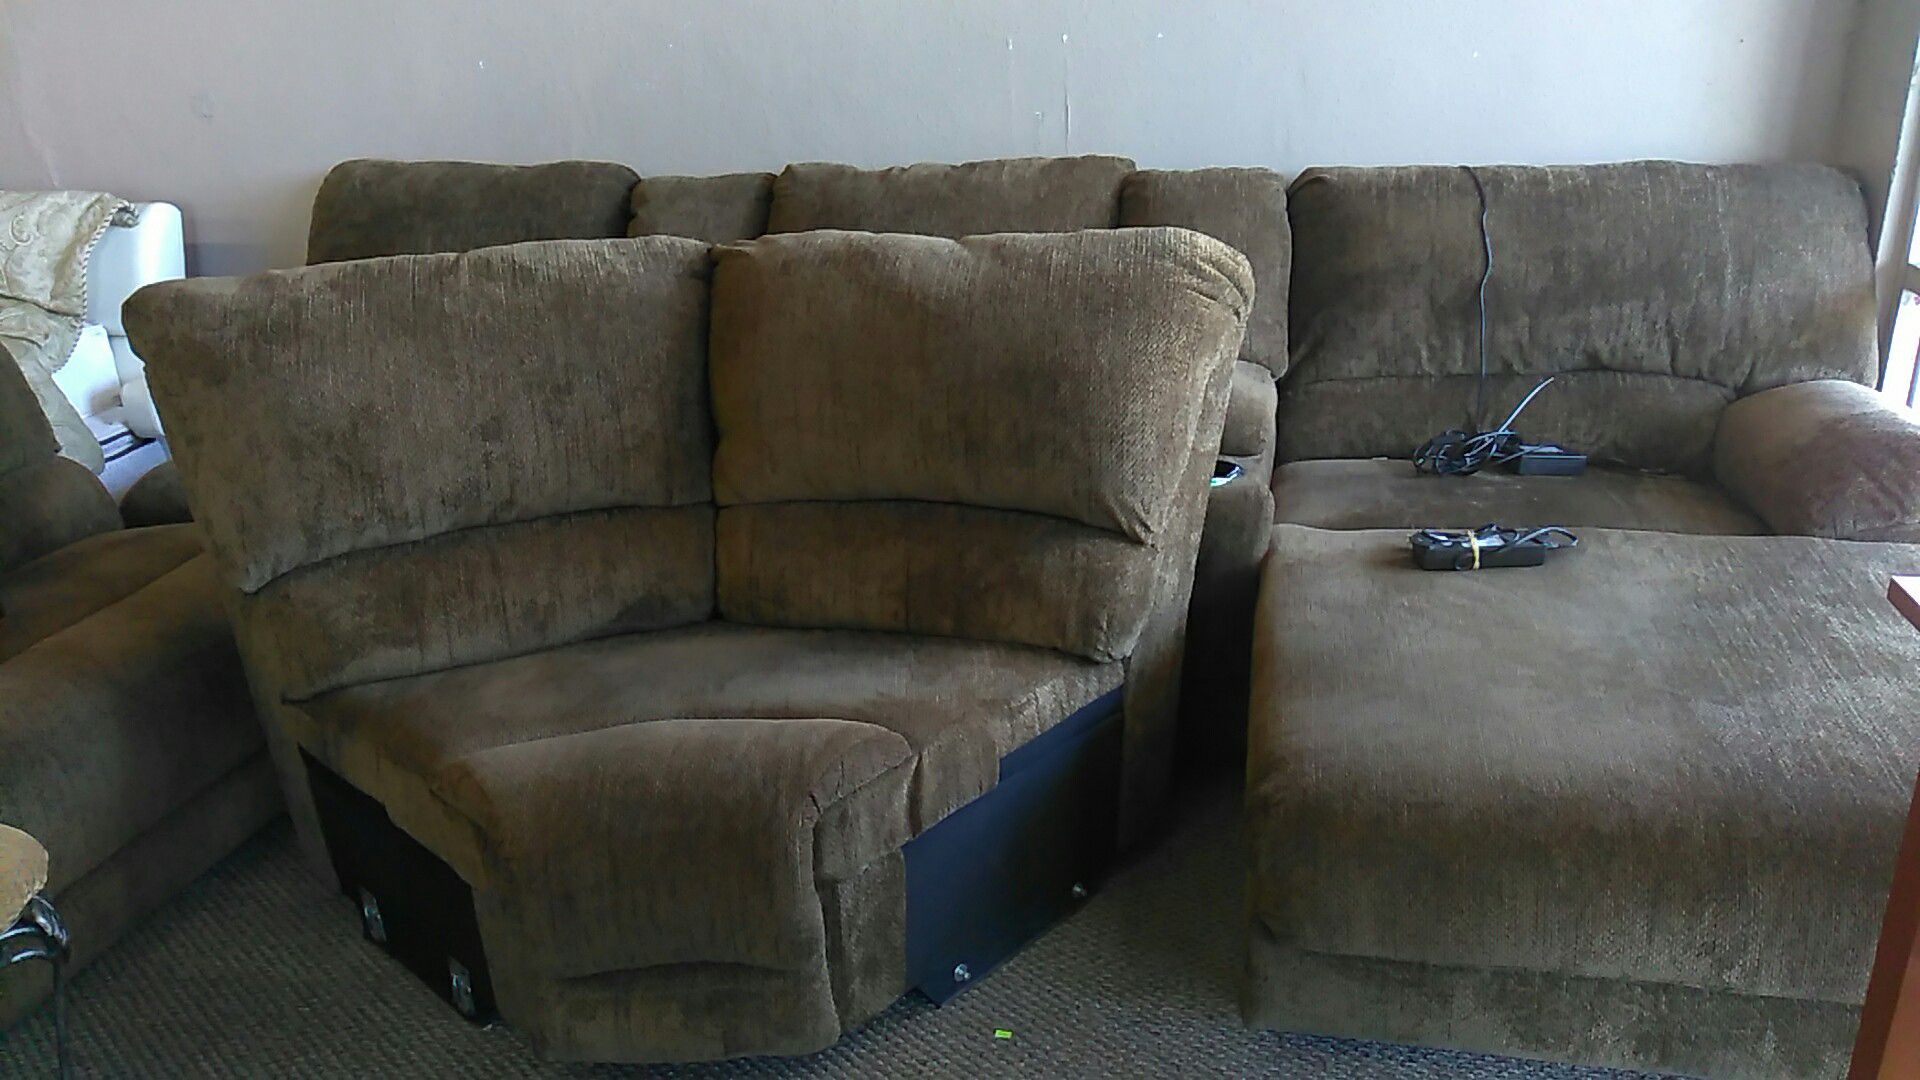 Brand-new brown sectional set with cup holders and 4 electric recliners